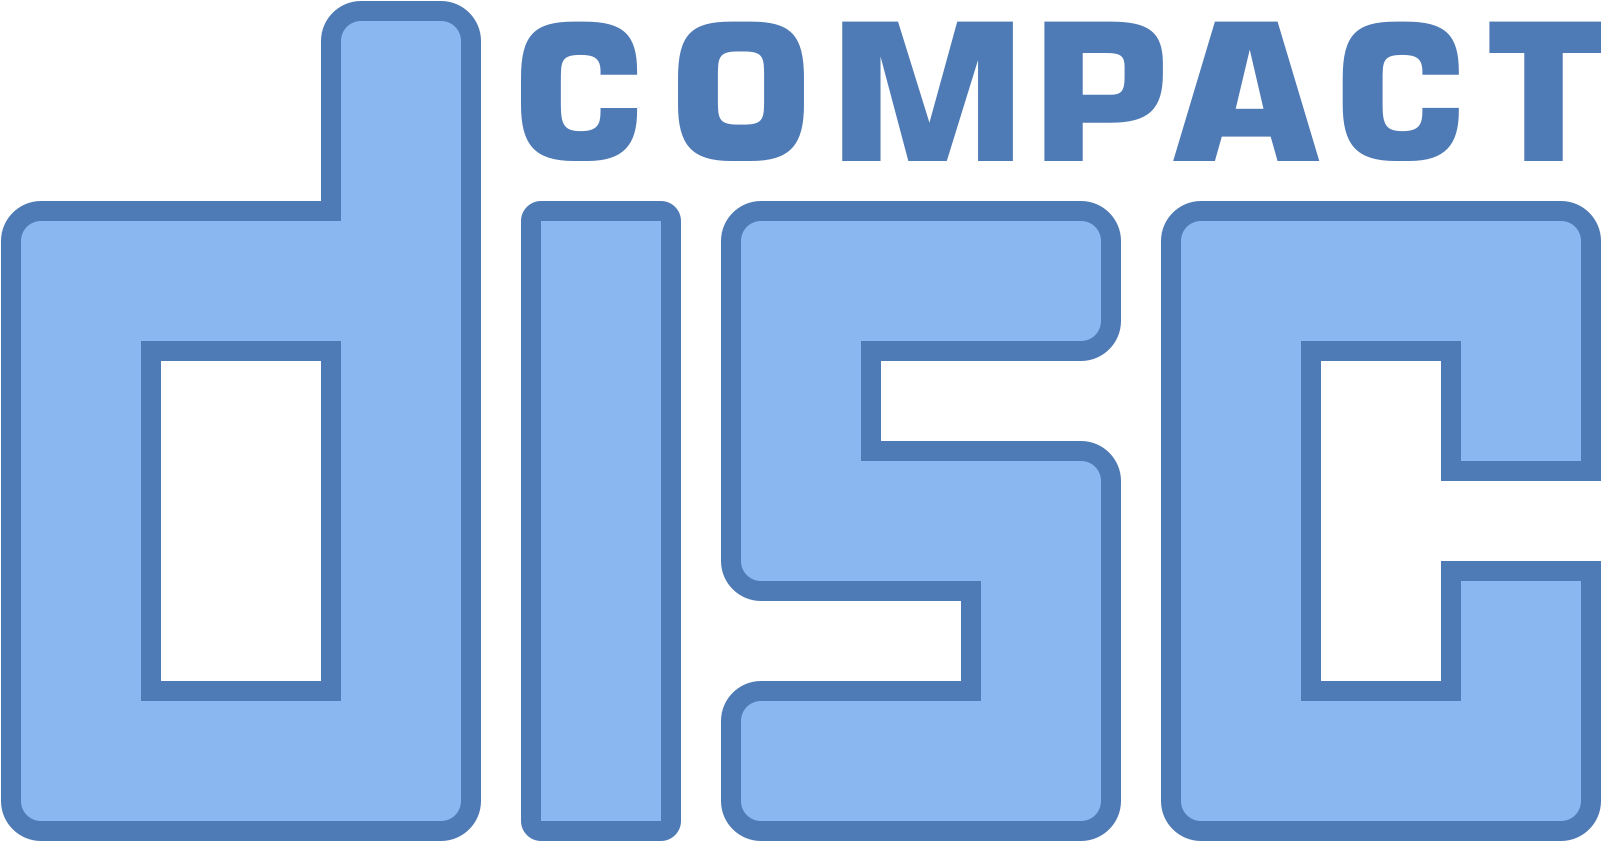 Compact Disc Logo Graphic PNG